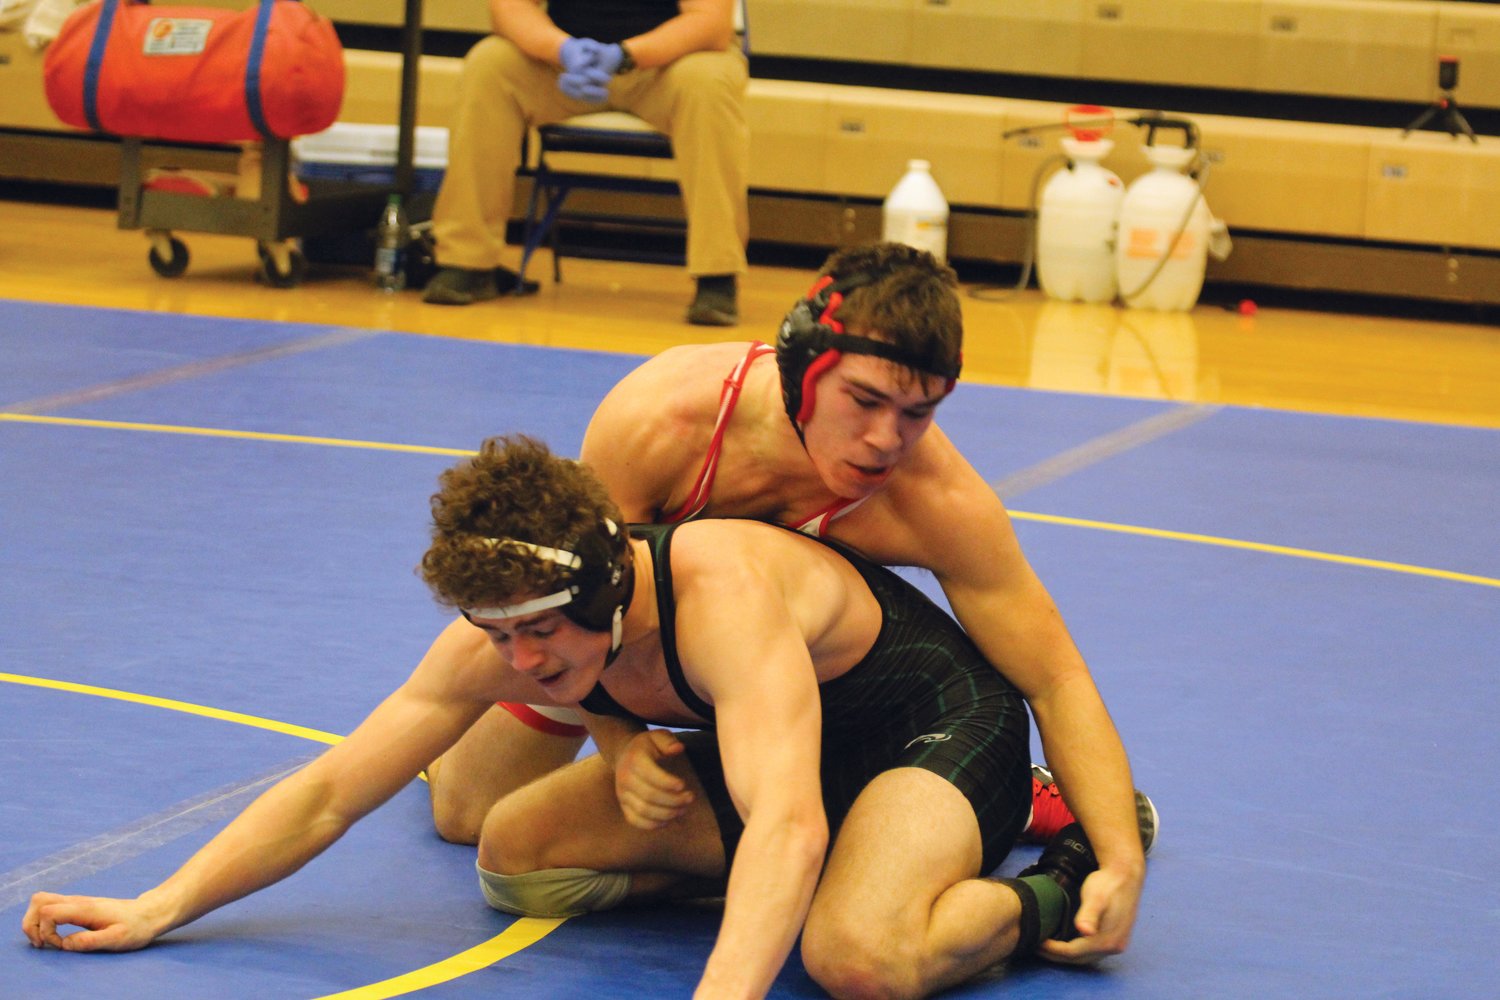 Southmont's Riley Woodall won by fall over Zionsville's Vincent McDonald in the finals at 182.